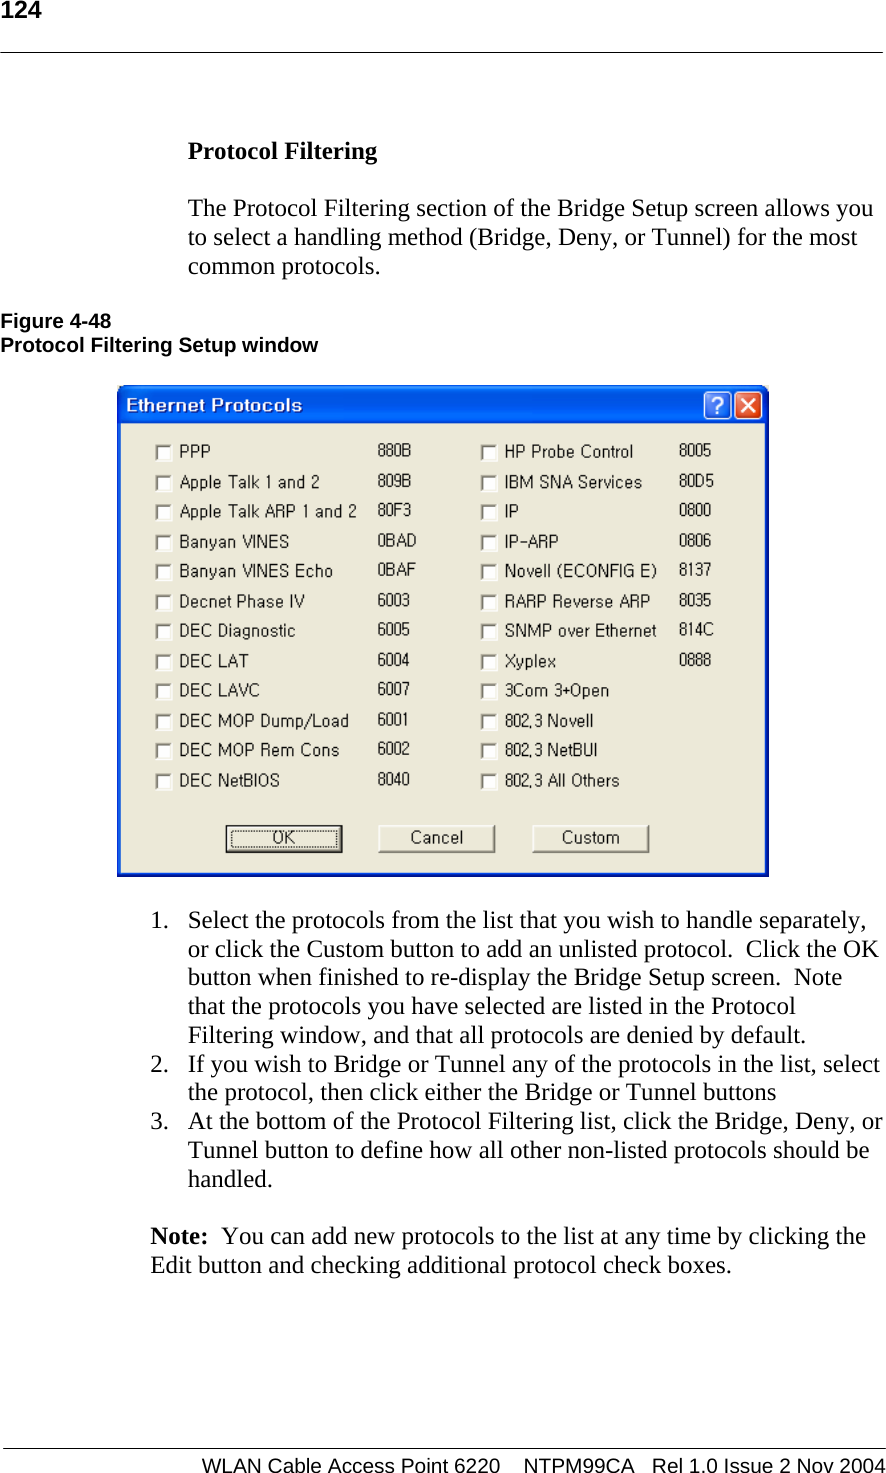   124  WLAN Cable Access Point 6220    NTPM99CA   Rel 1.0 Issue 2 Nov 2004  Protocol Filtering    The Protocol Filtering section of the Bridge Setup screen allows you to select a handling method (Bridge, Deny, or Tunnel) for the most common protocols.    Figure 4-48 Protocol Filtering Setup window    1. Select the protocols from the list that you wish to handle separately, or click the Custom button to add an unlisted protocol.  Click the OK button when finished to re-display the Bridge Setup screen.  Note that the protocols you have selected are listed in the Protocol Filtering window, and that all protocols are denied by default. 2. If you wish to Bridge or Tunnel any of the protocols in the list, select the protocol, then click either the Bridge or Tunnel buttons 3. At the bottom of the Protocol Filtering list, click the Bridge, Deny, or Tunnel button to define how all other non-listed protocols should be handled.  Note:  You can add new protocols to the list at any time by clicking the Edit button and checking additional protocol check boxes. 